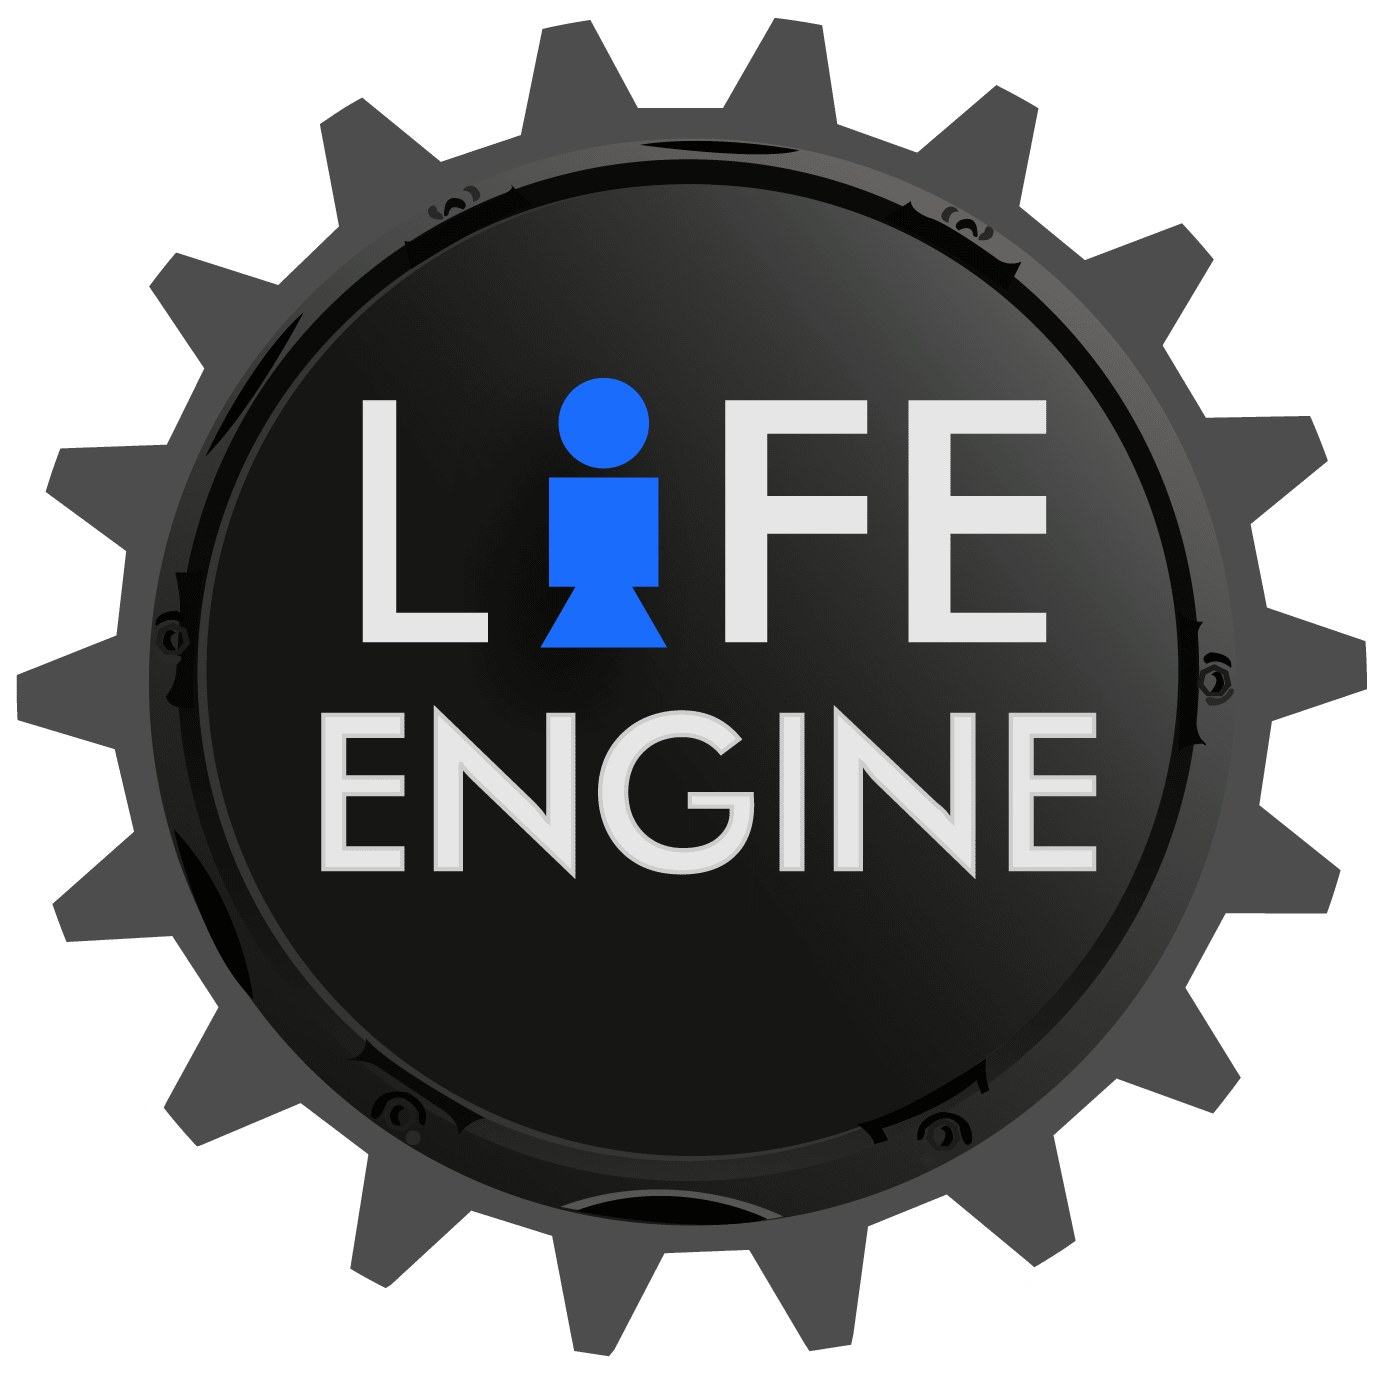 Wayne Smith of Life Engine Launches The World's First Science-Based Entrepreneurial Ecosystem